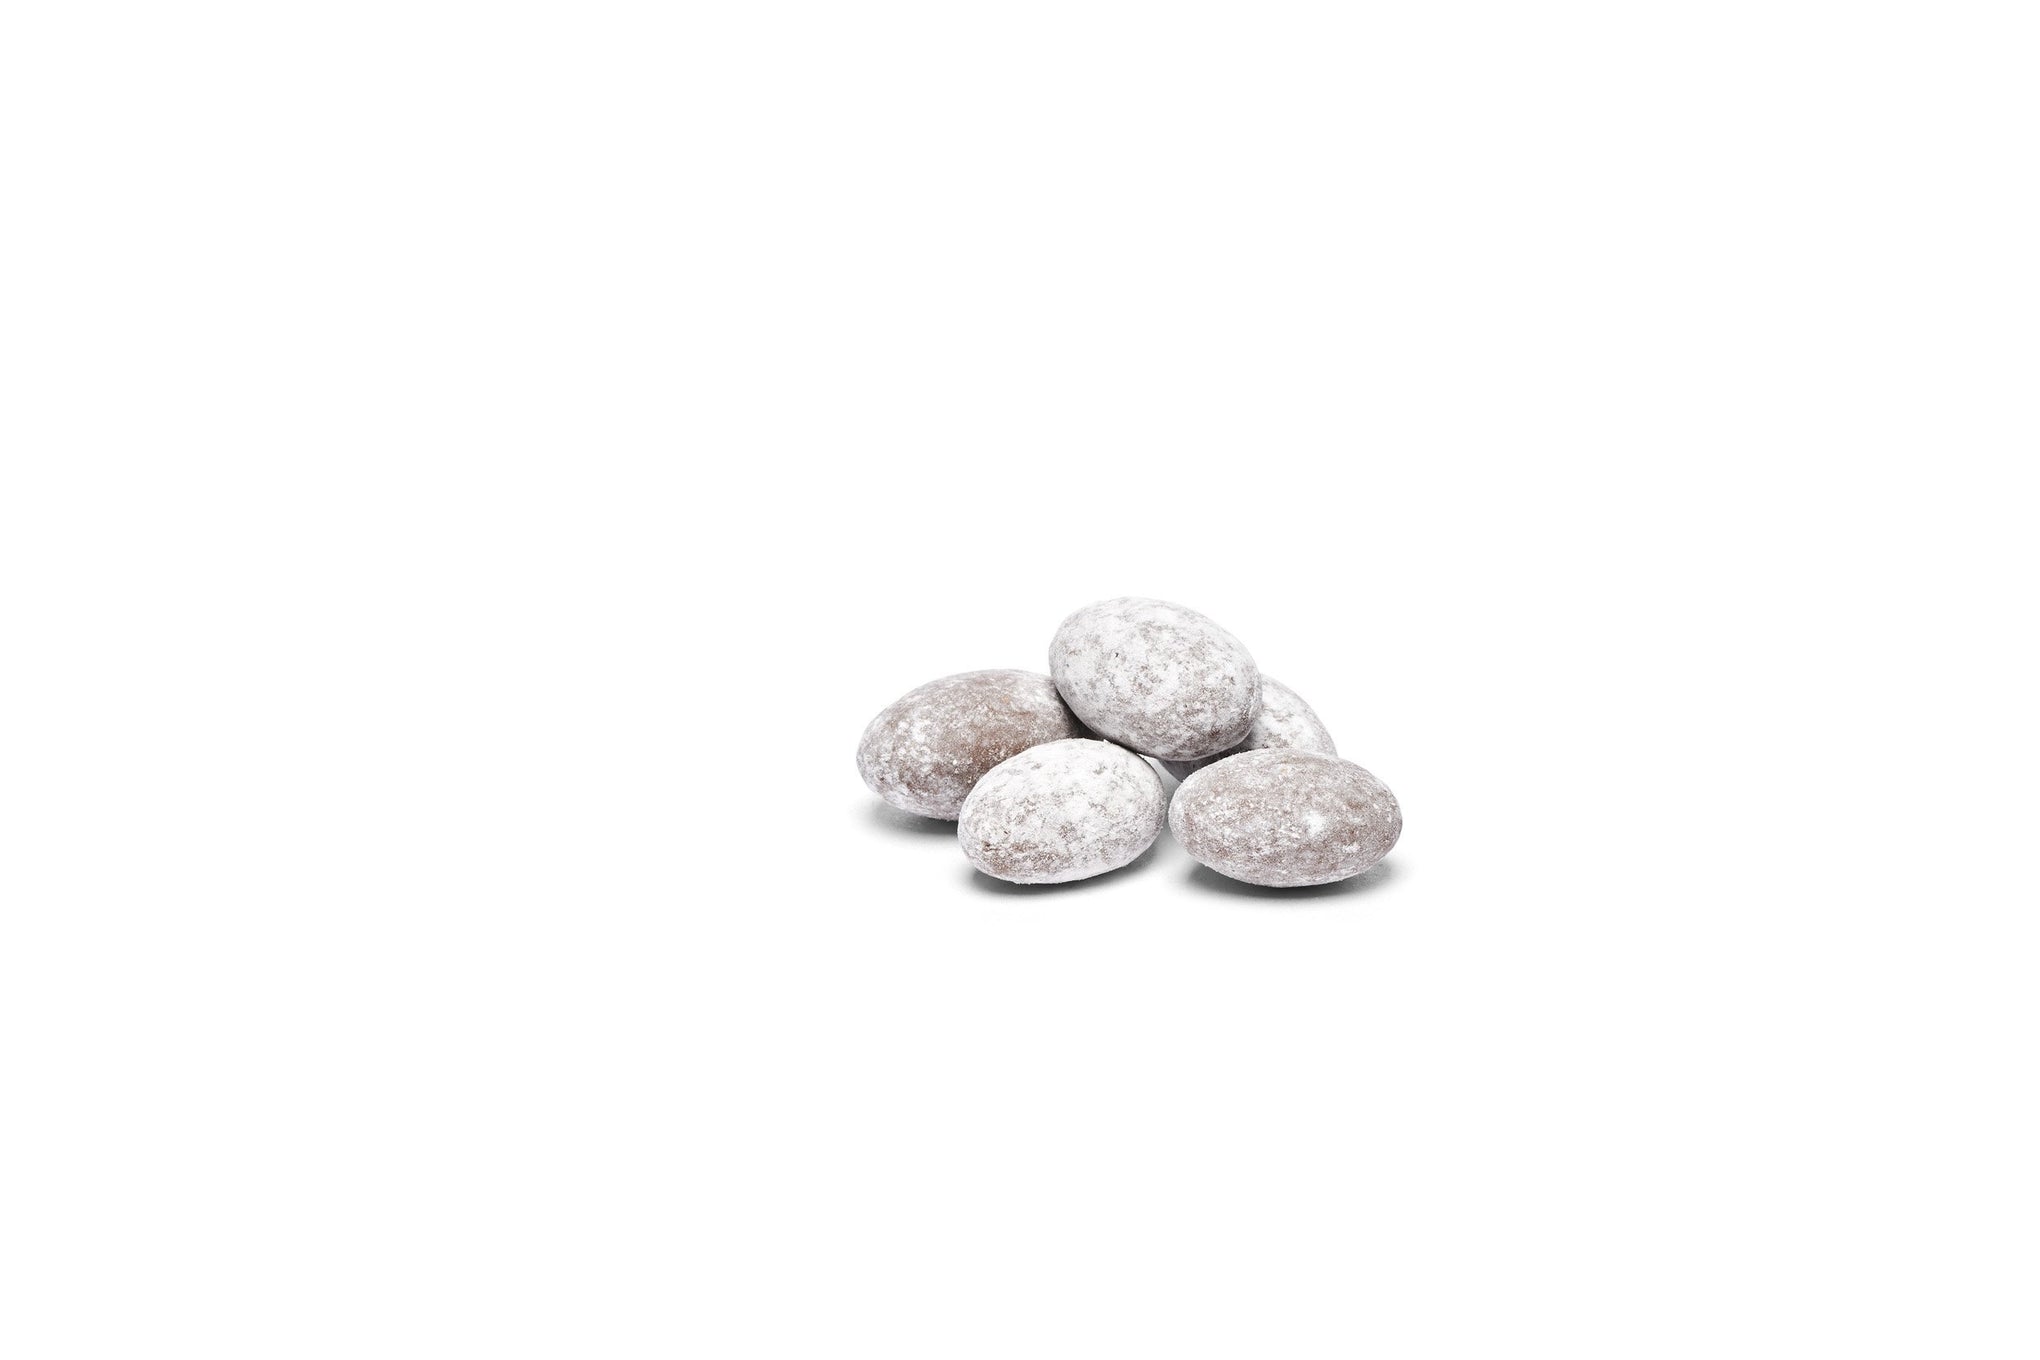 Dusted almonds placed together